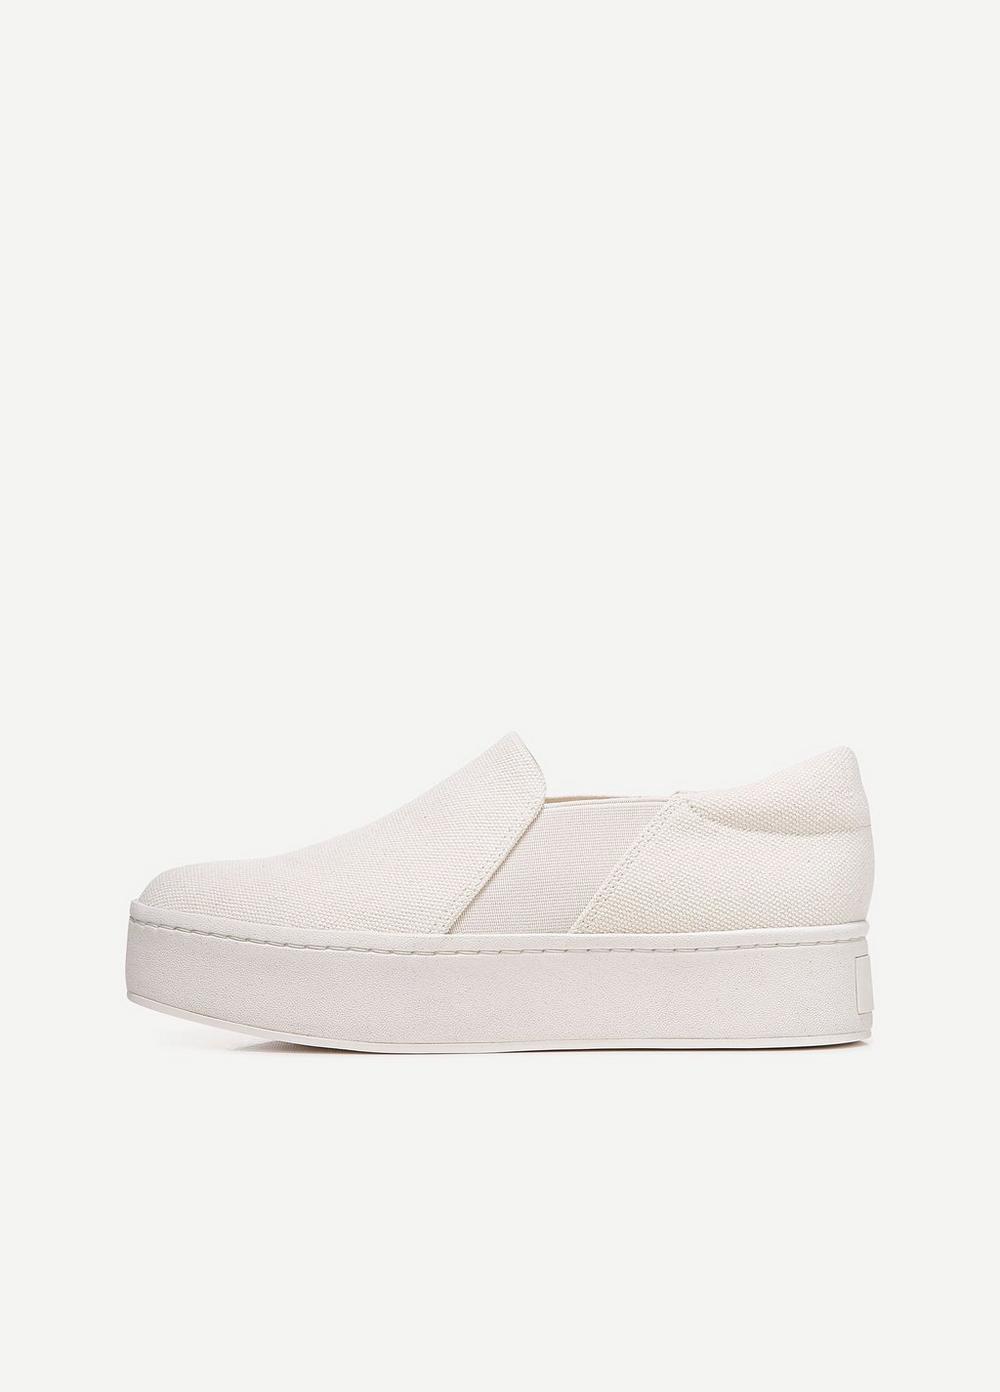 Vince Womens Varley White Leather Fashion Sneaker 